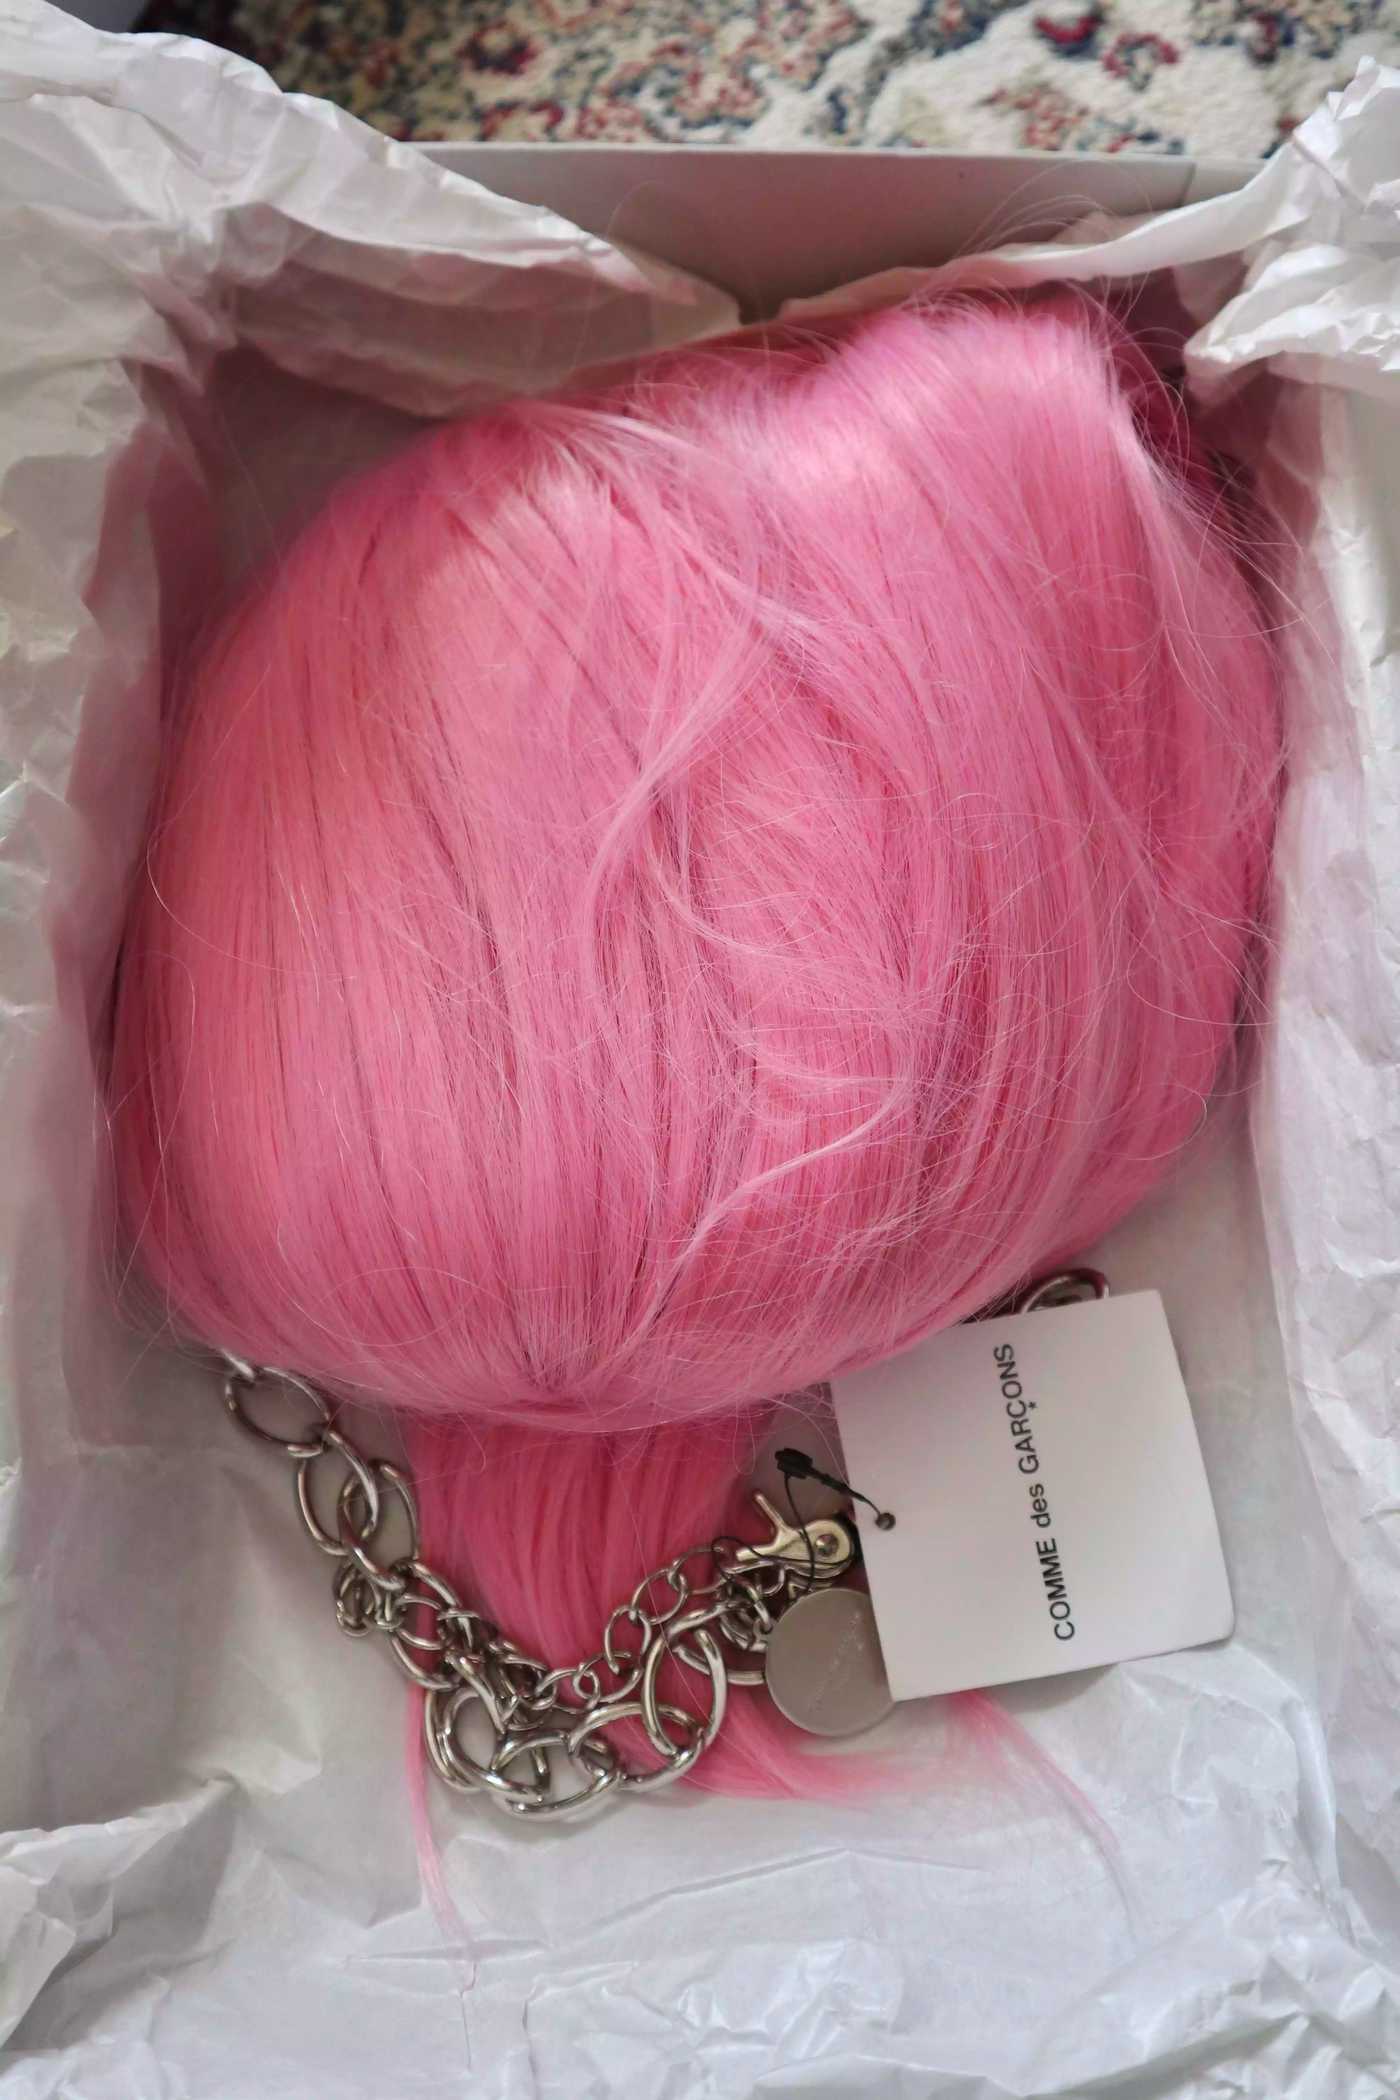 CDG Homme Plus 20AW "Coulor Resistance" Pink Wigs Necklace